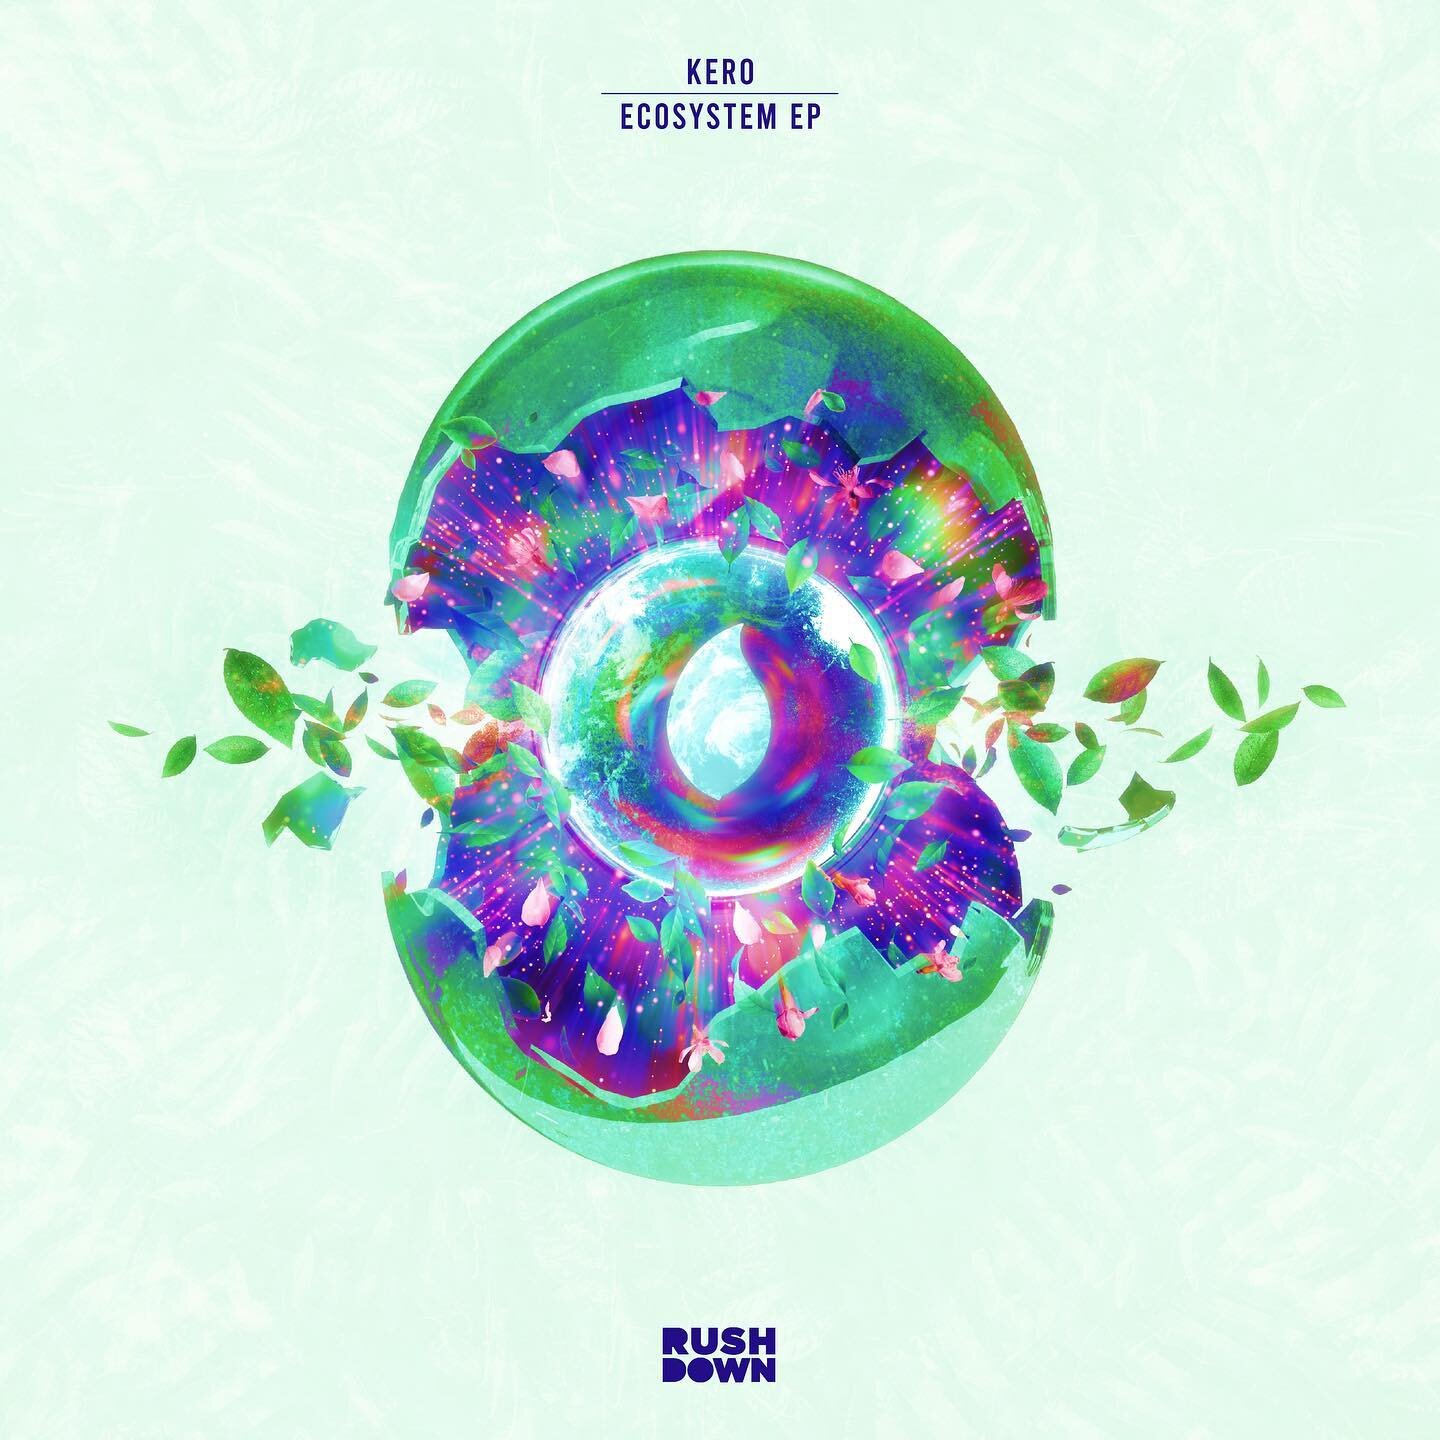 My debut EP &ldquo;Ecosystem&rdquo; comes out on the 25th through the AMAZING @rushdownrecs featuring collabs with @dnakm and @vanatice 💧🍃
Pre-Save link is in the bio!!!
.
#dubstep #rushdown #colorbass #colourbass #melodicriddim #futureriddim #melo